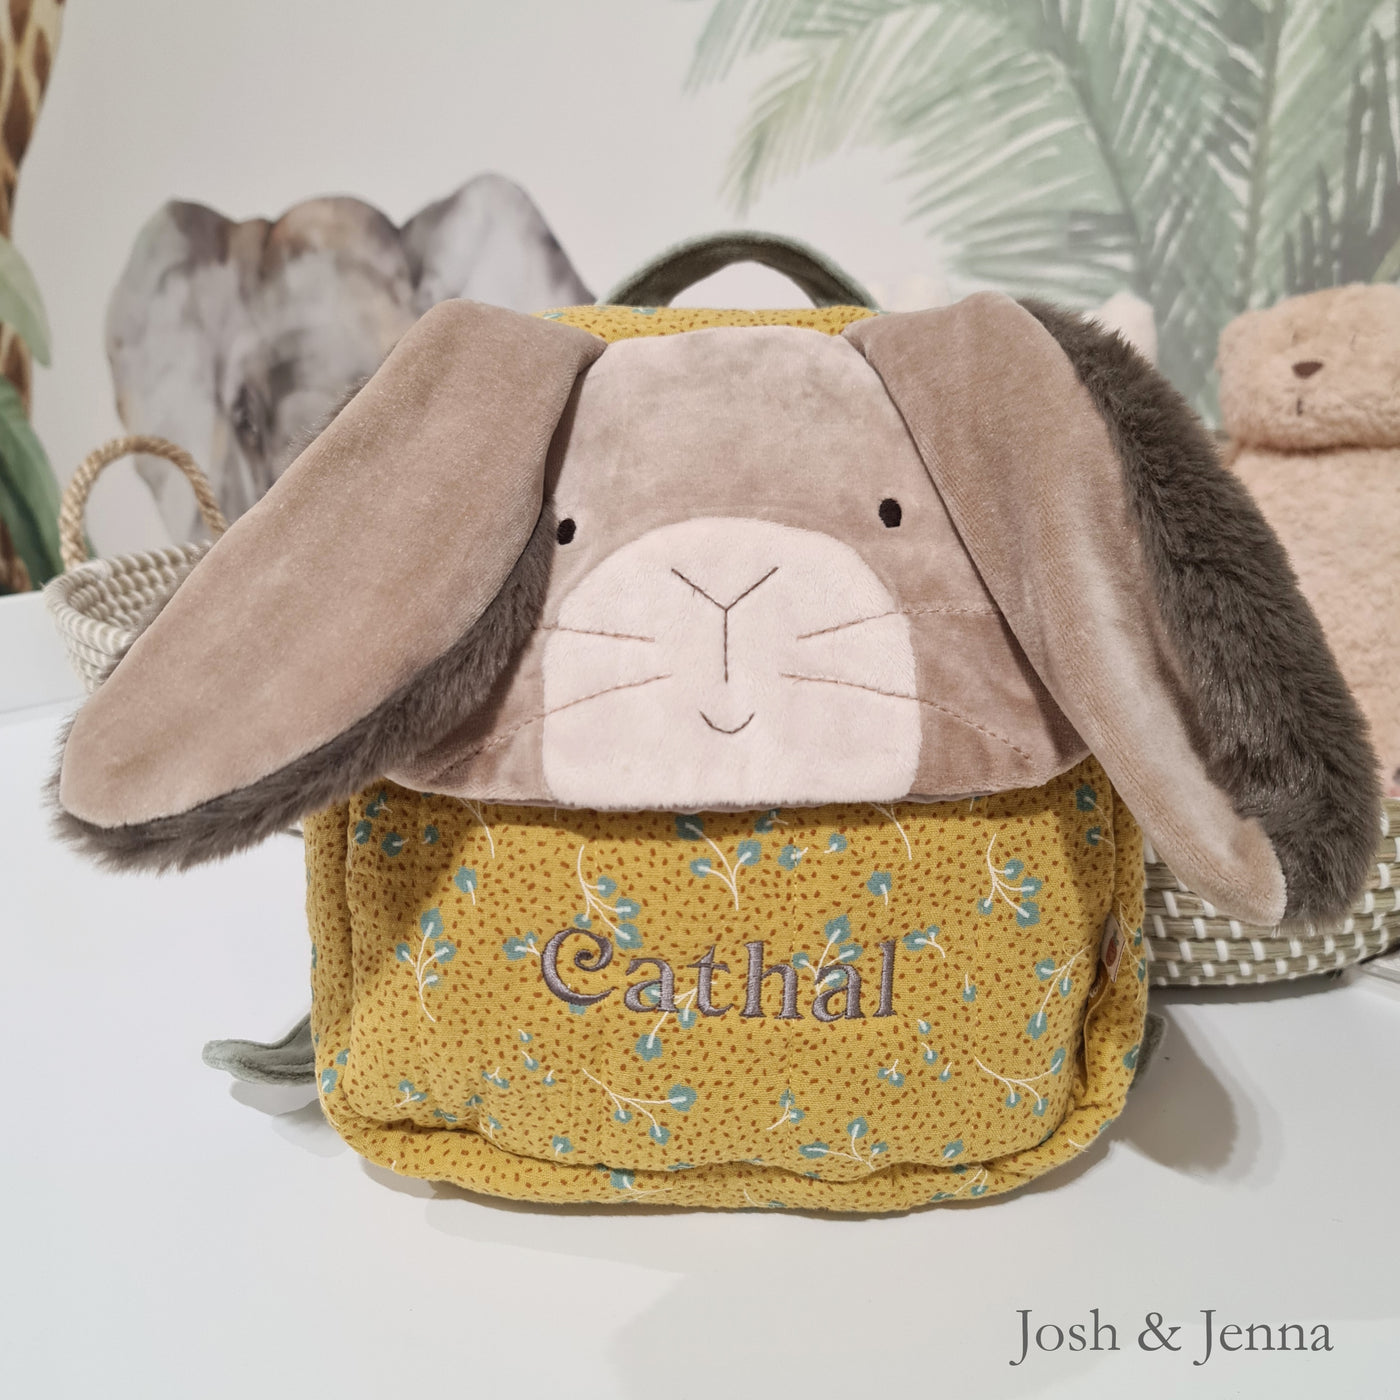 Moulin Roty Personalised Rabbit Backpack